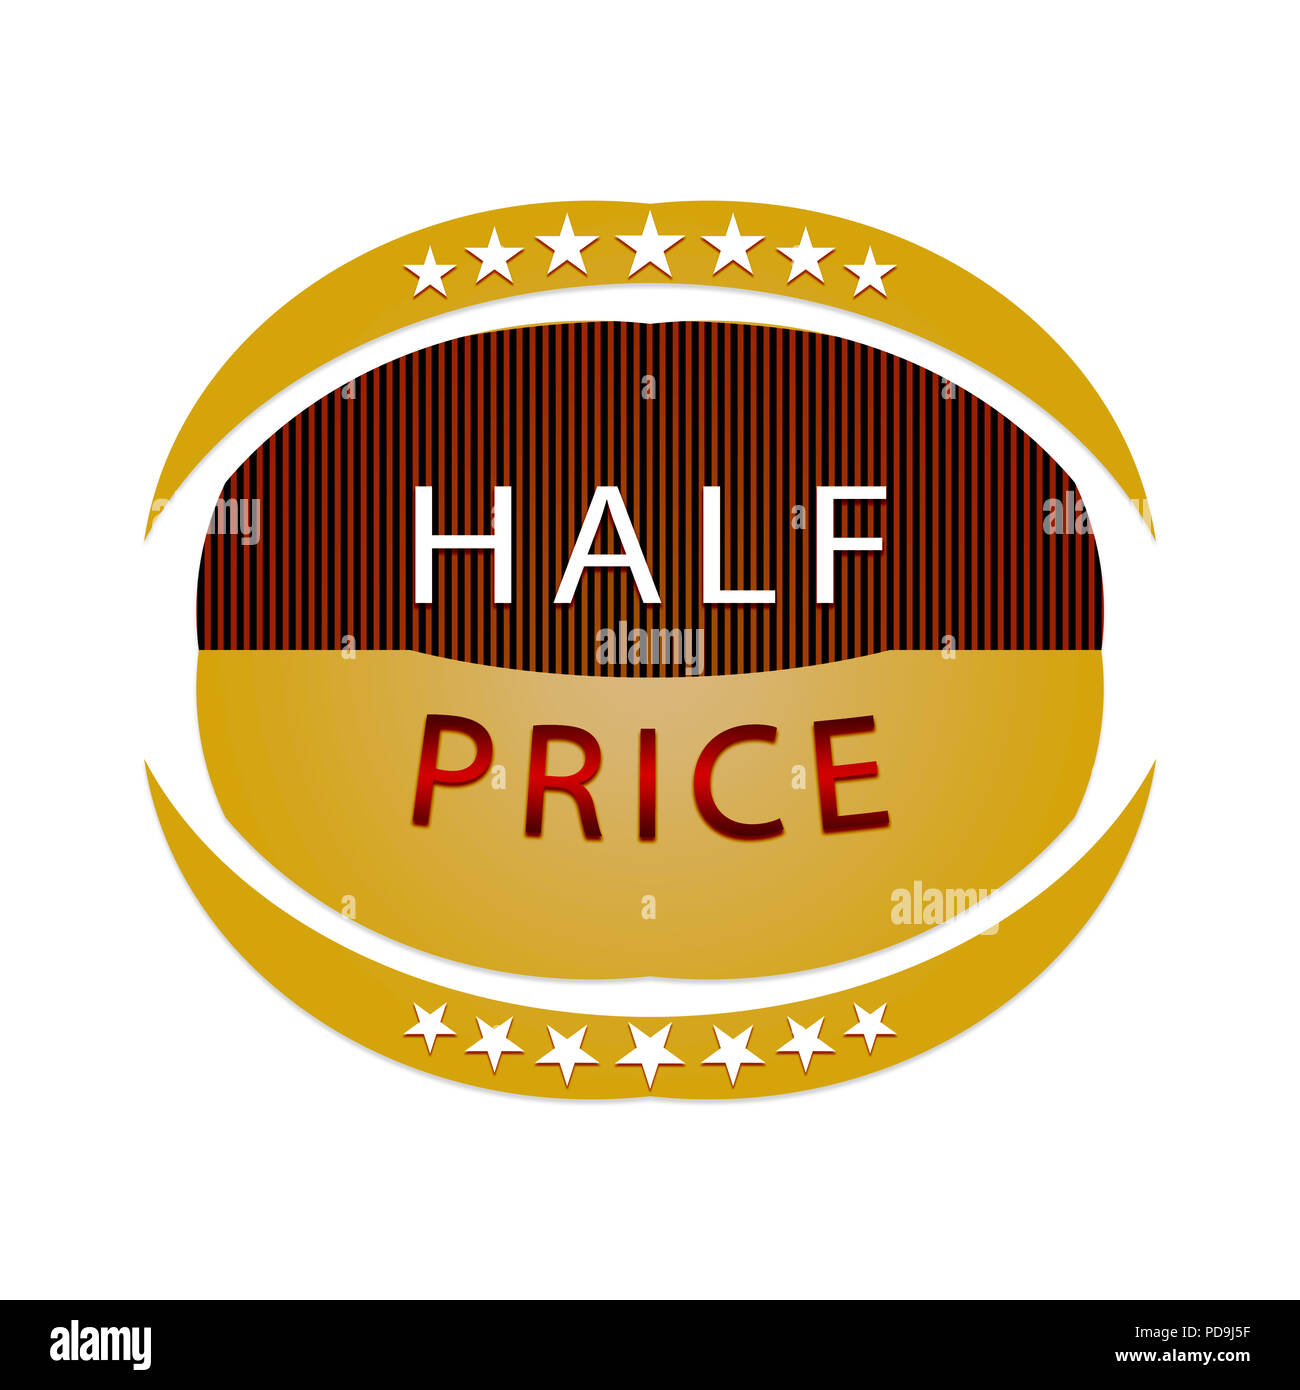 Half price label with stripes and stars Stock Photo